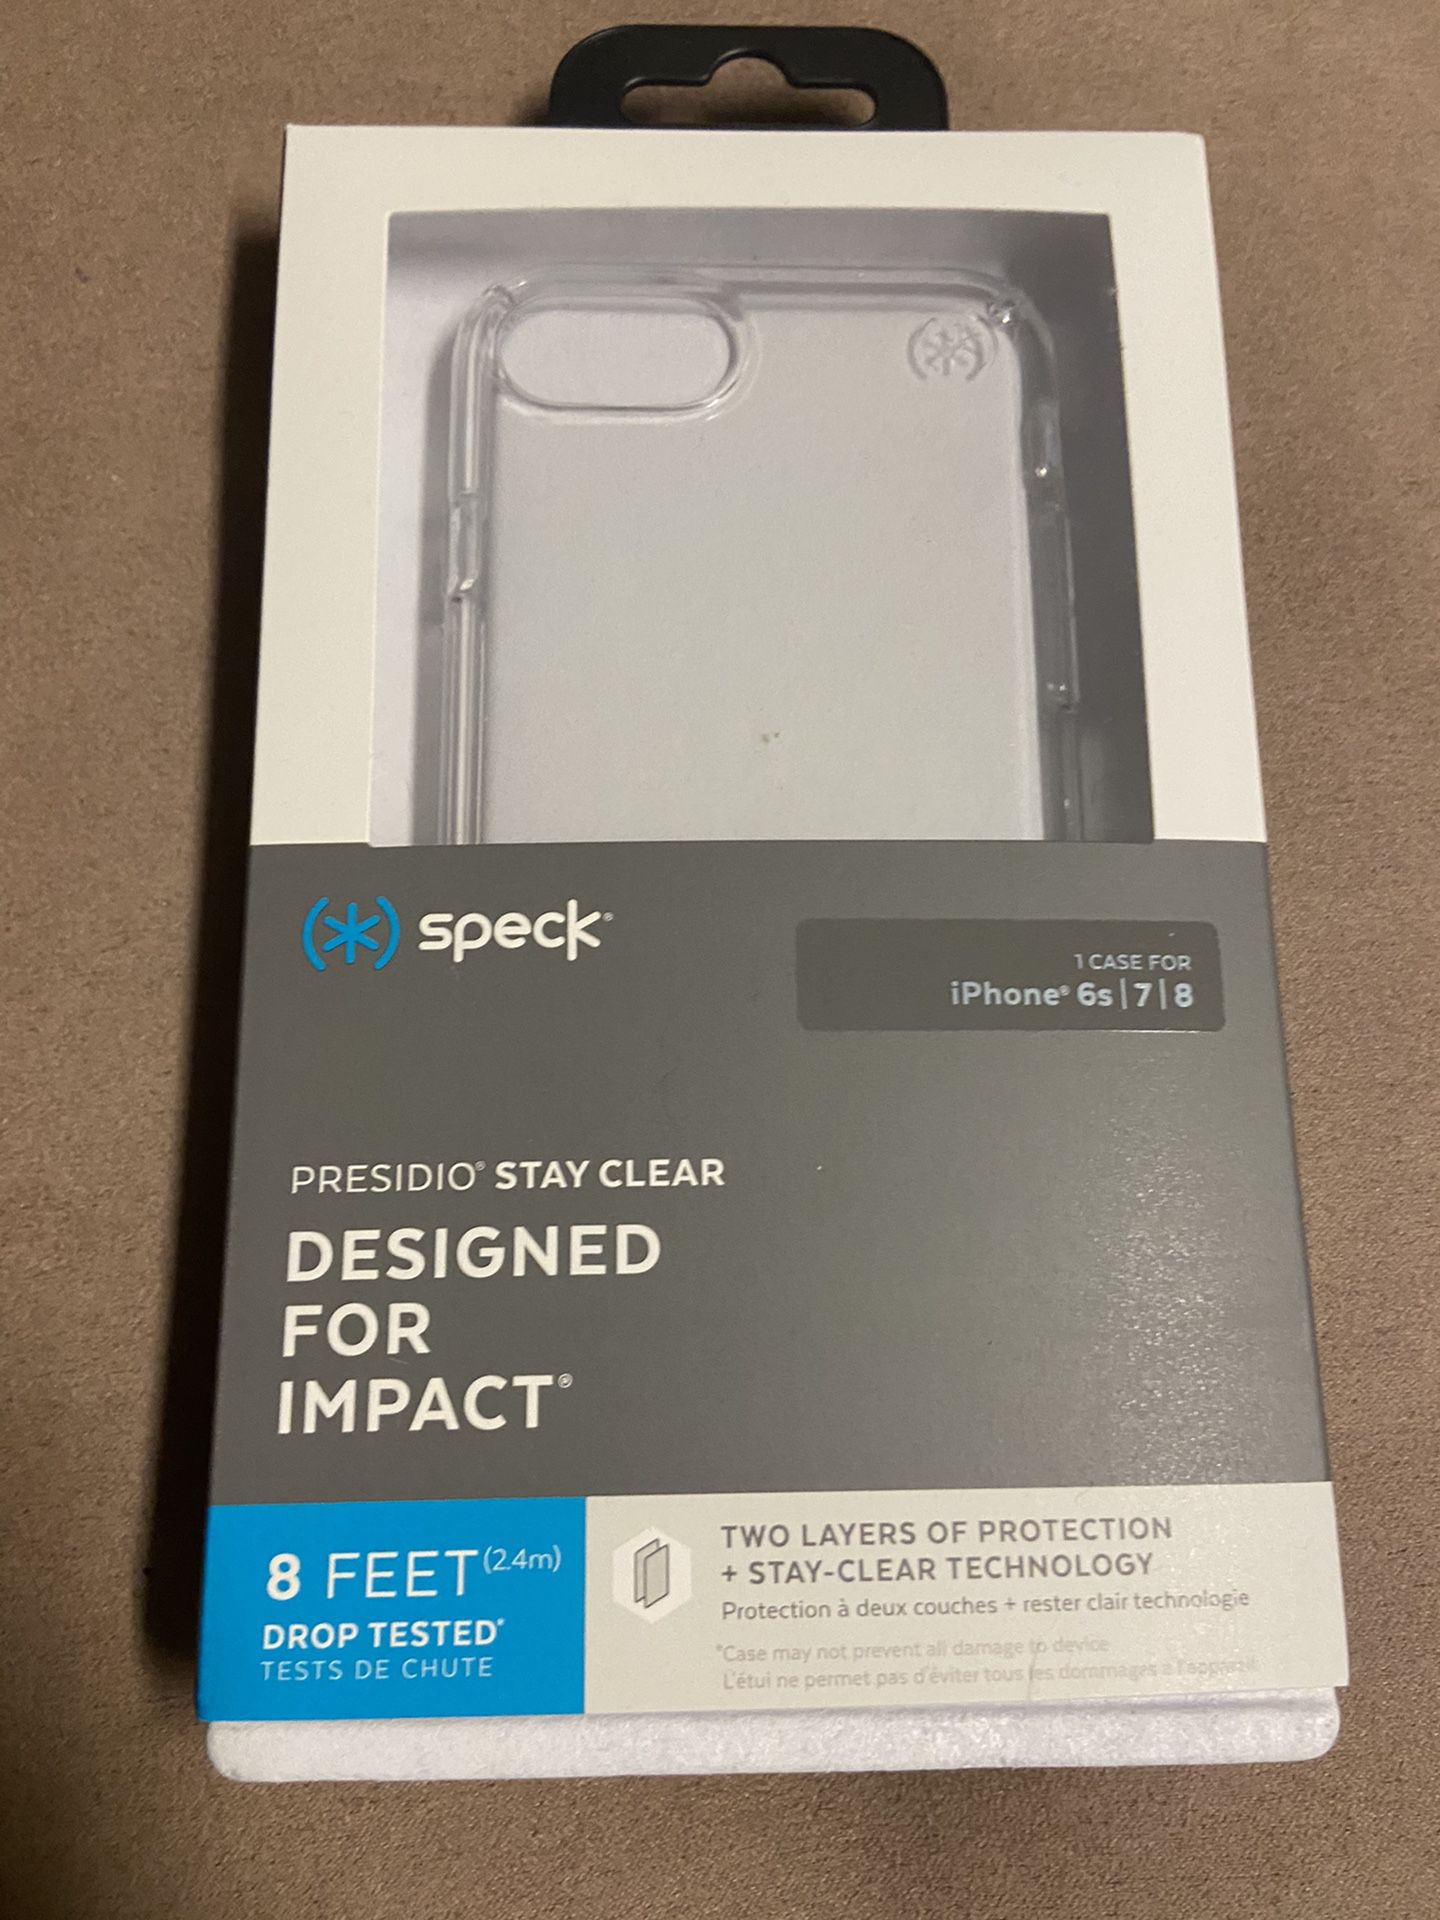 SPECK Presidio Stay Clear iPhone 6s, 7, 8 Case